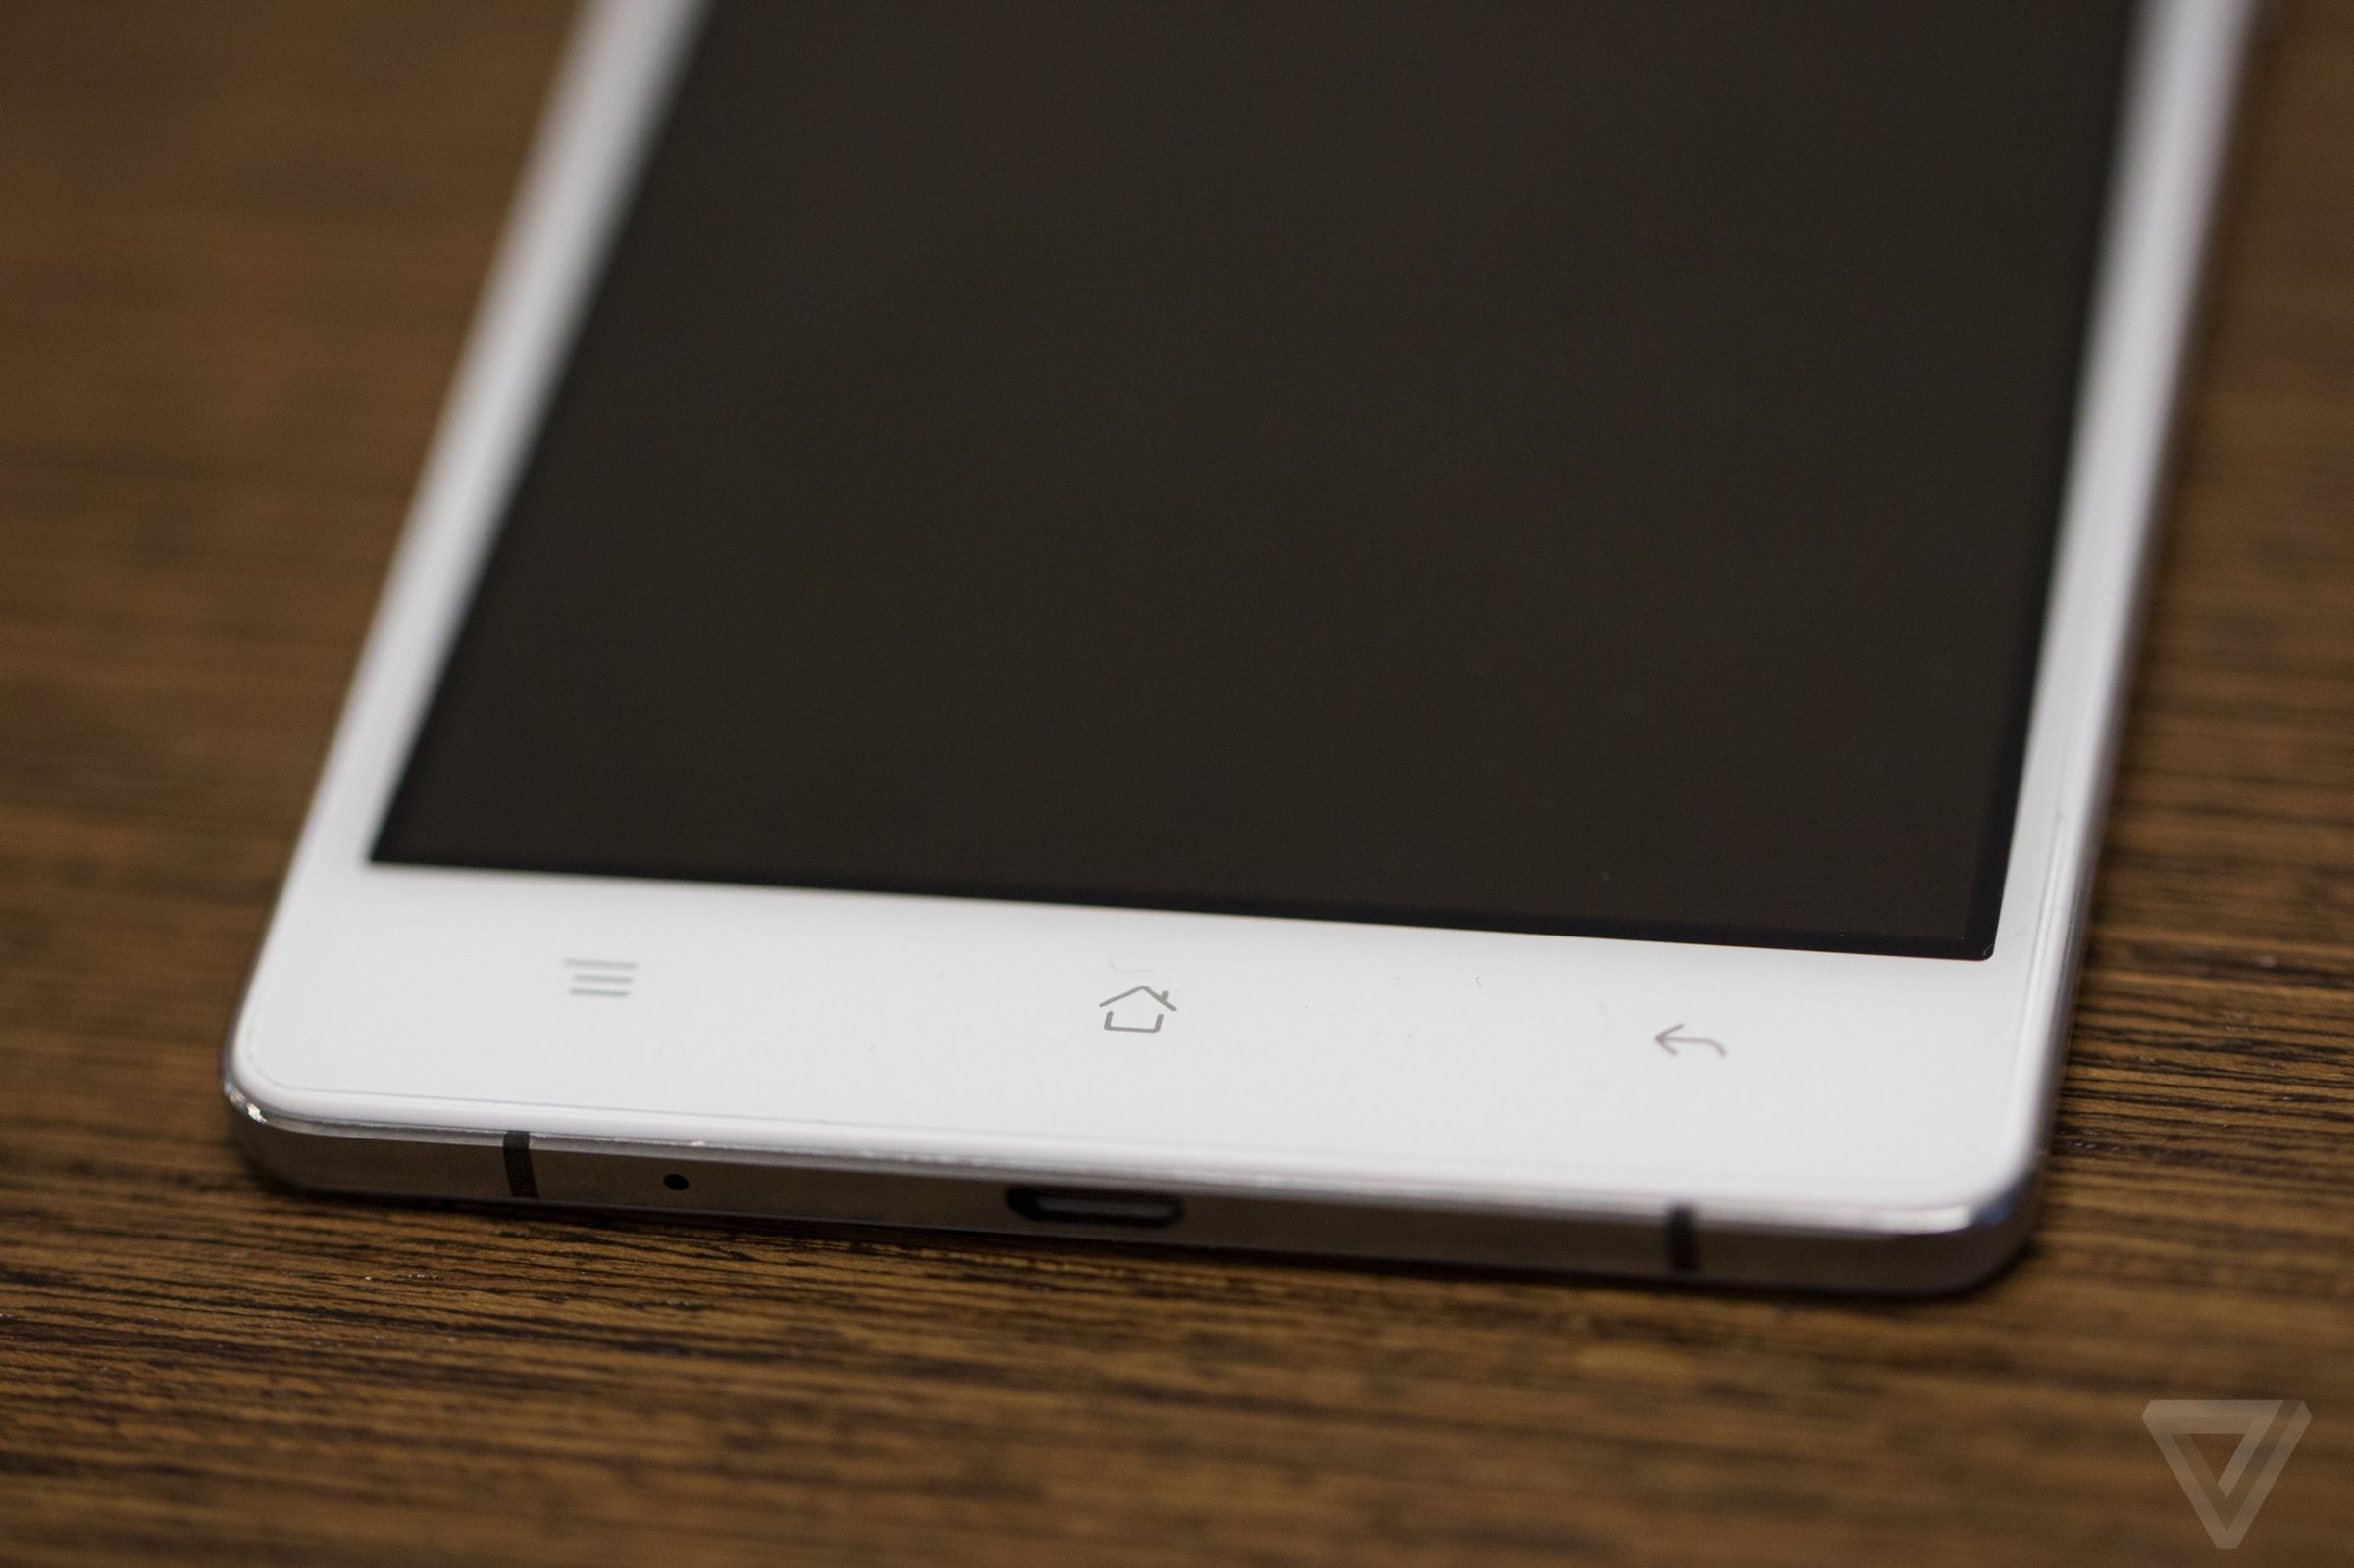 Oppo R5 hands-on photos